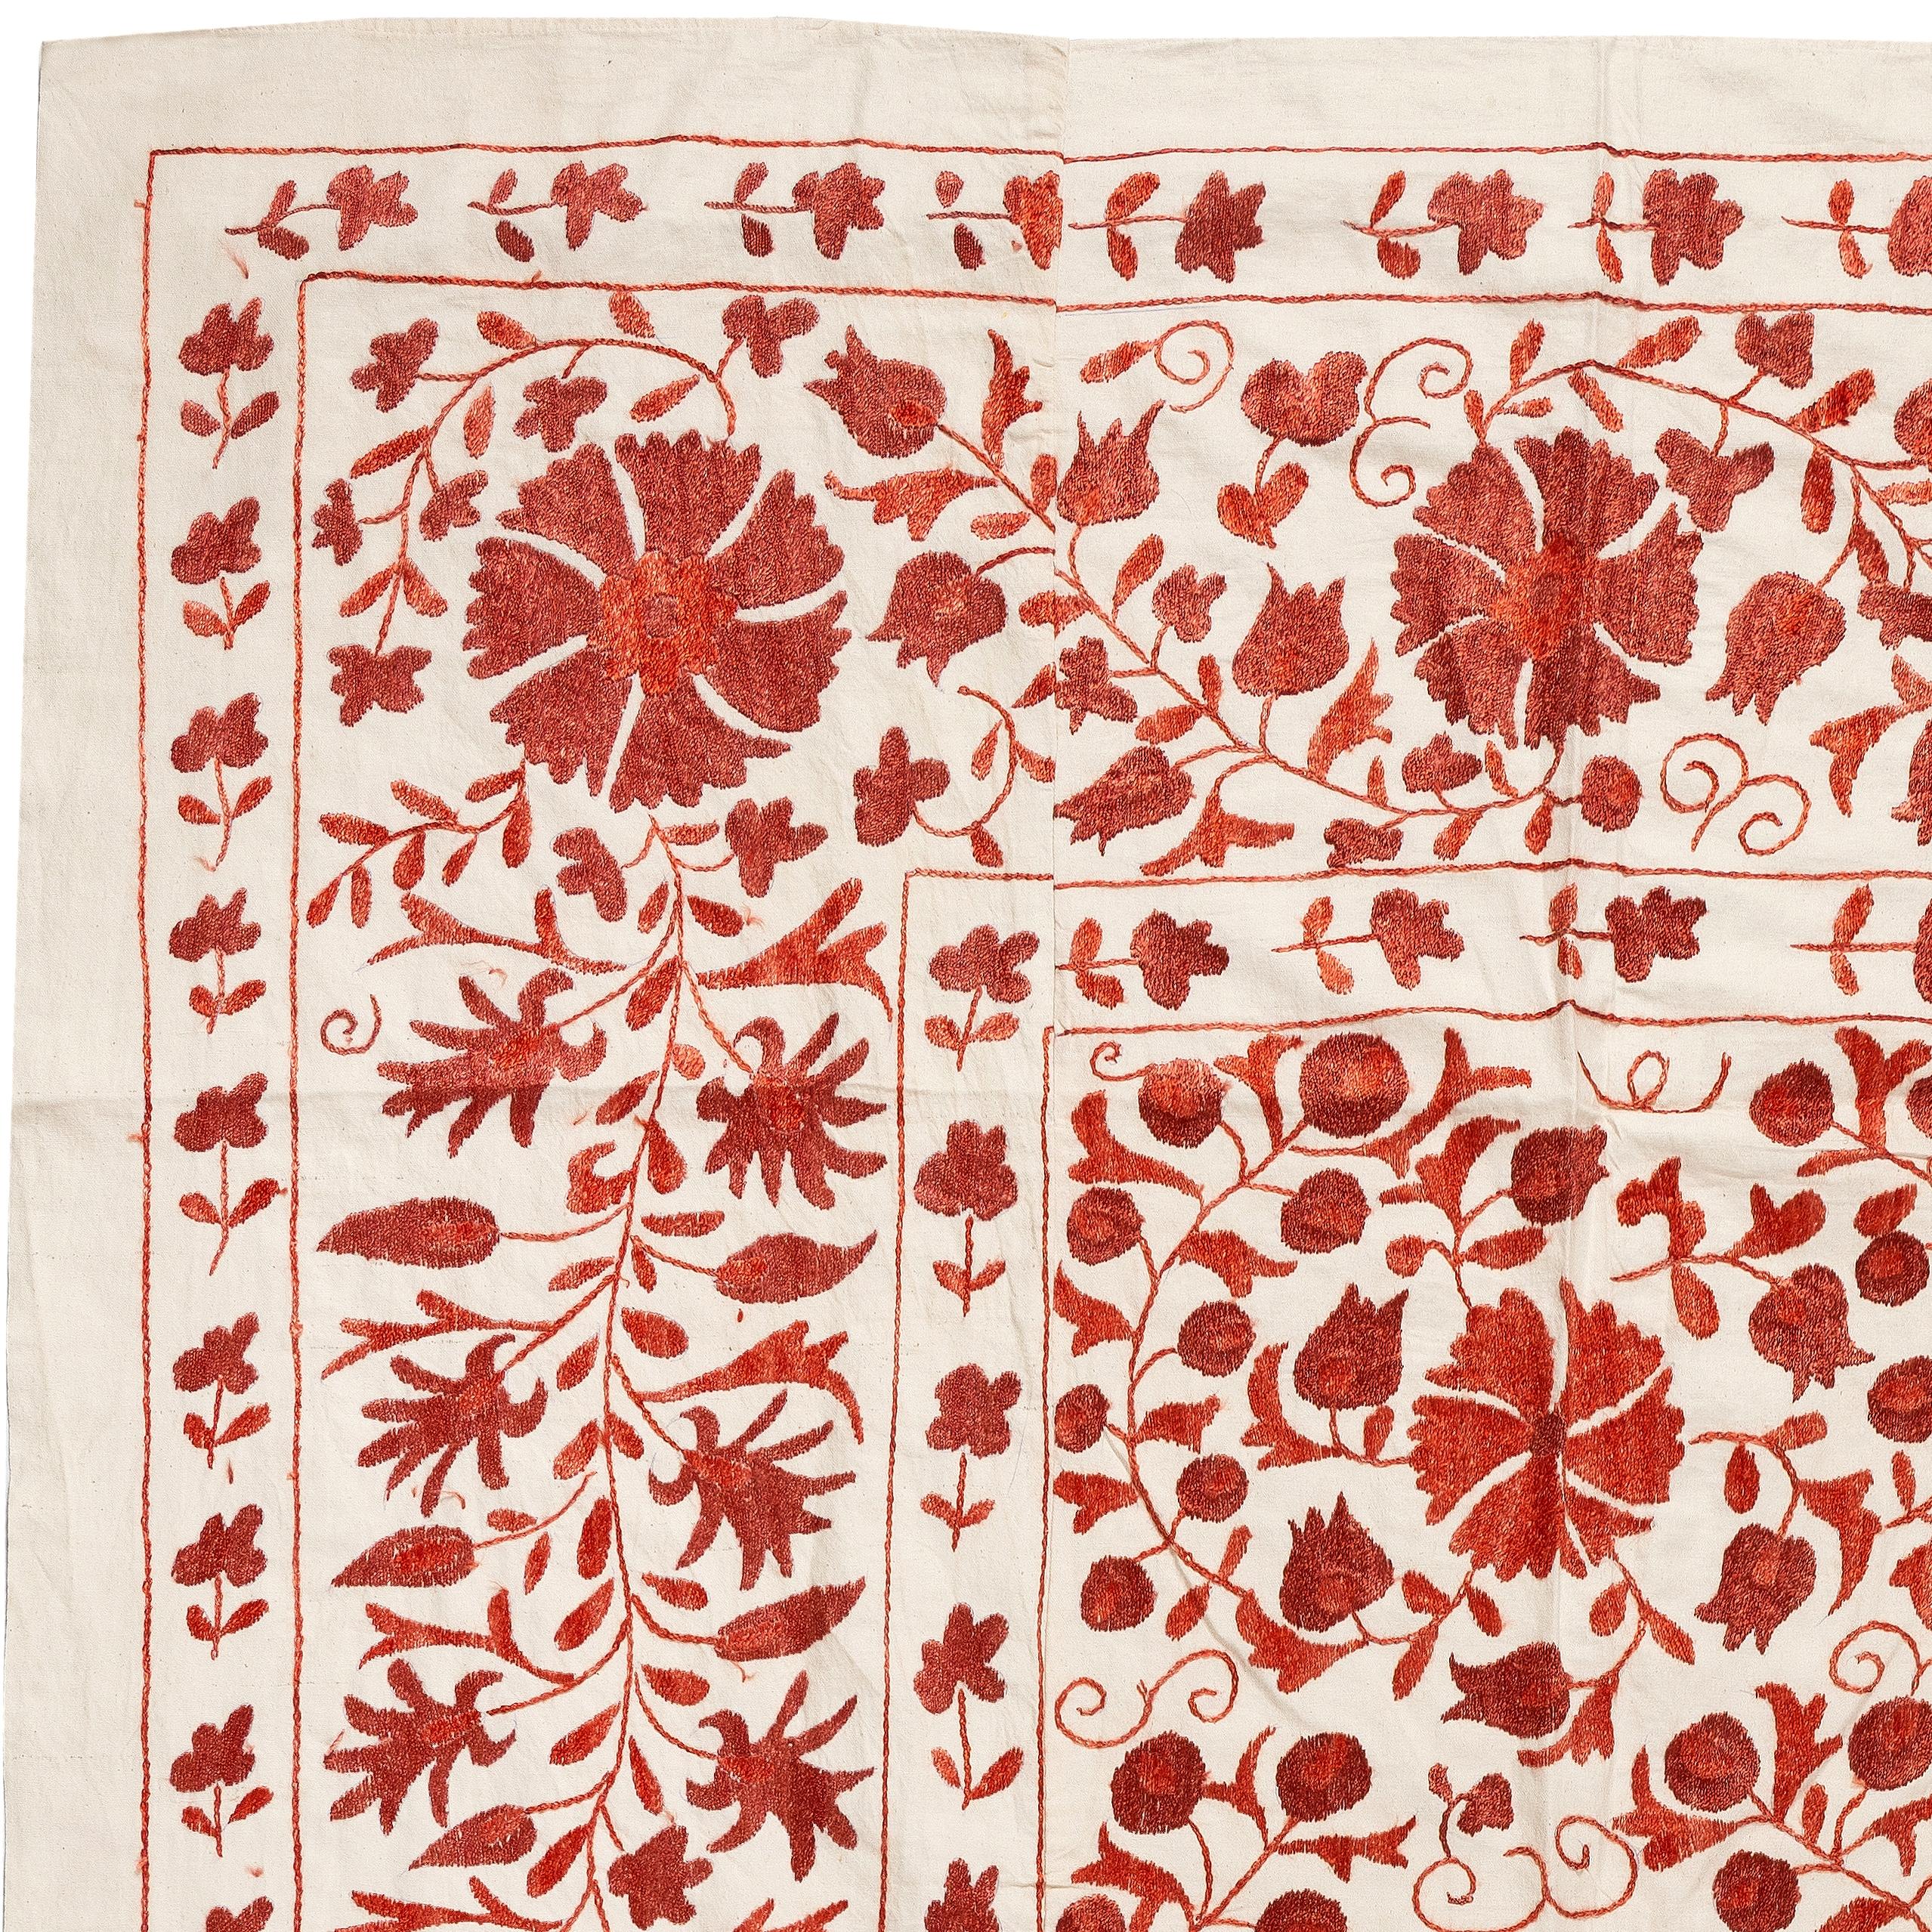 Embroidered 4.8x7 Ft Silk Embroidery Wall Hanging, Uzbek Suzani Table Cover in Red & Ivory For Sale